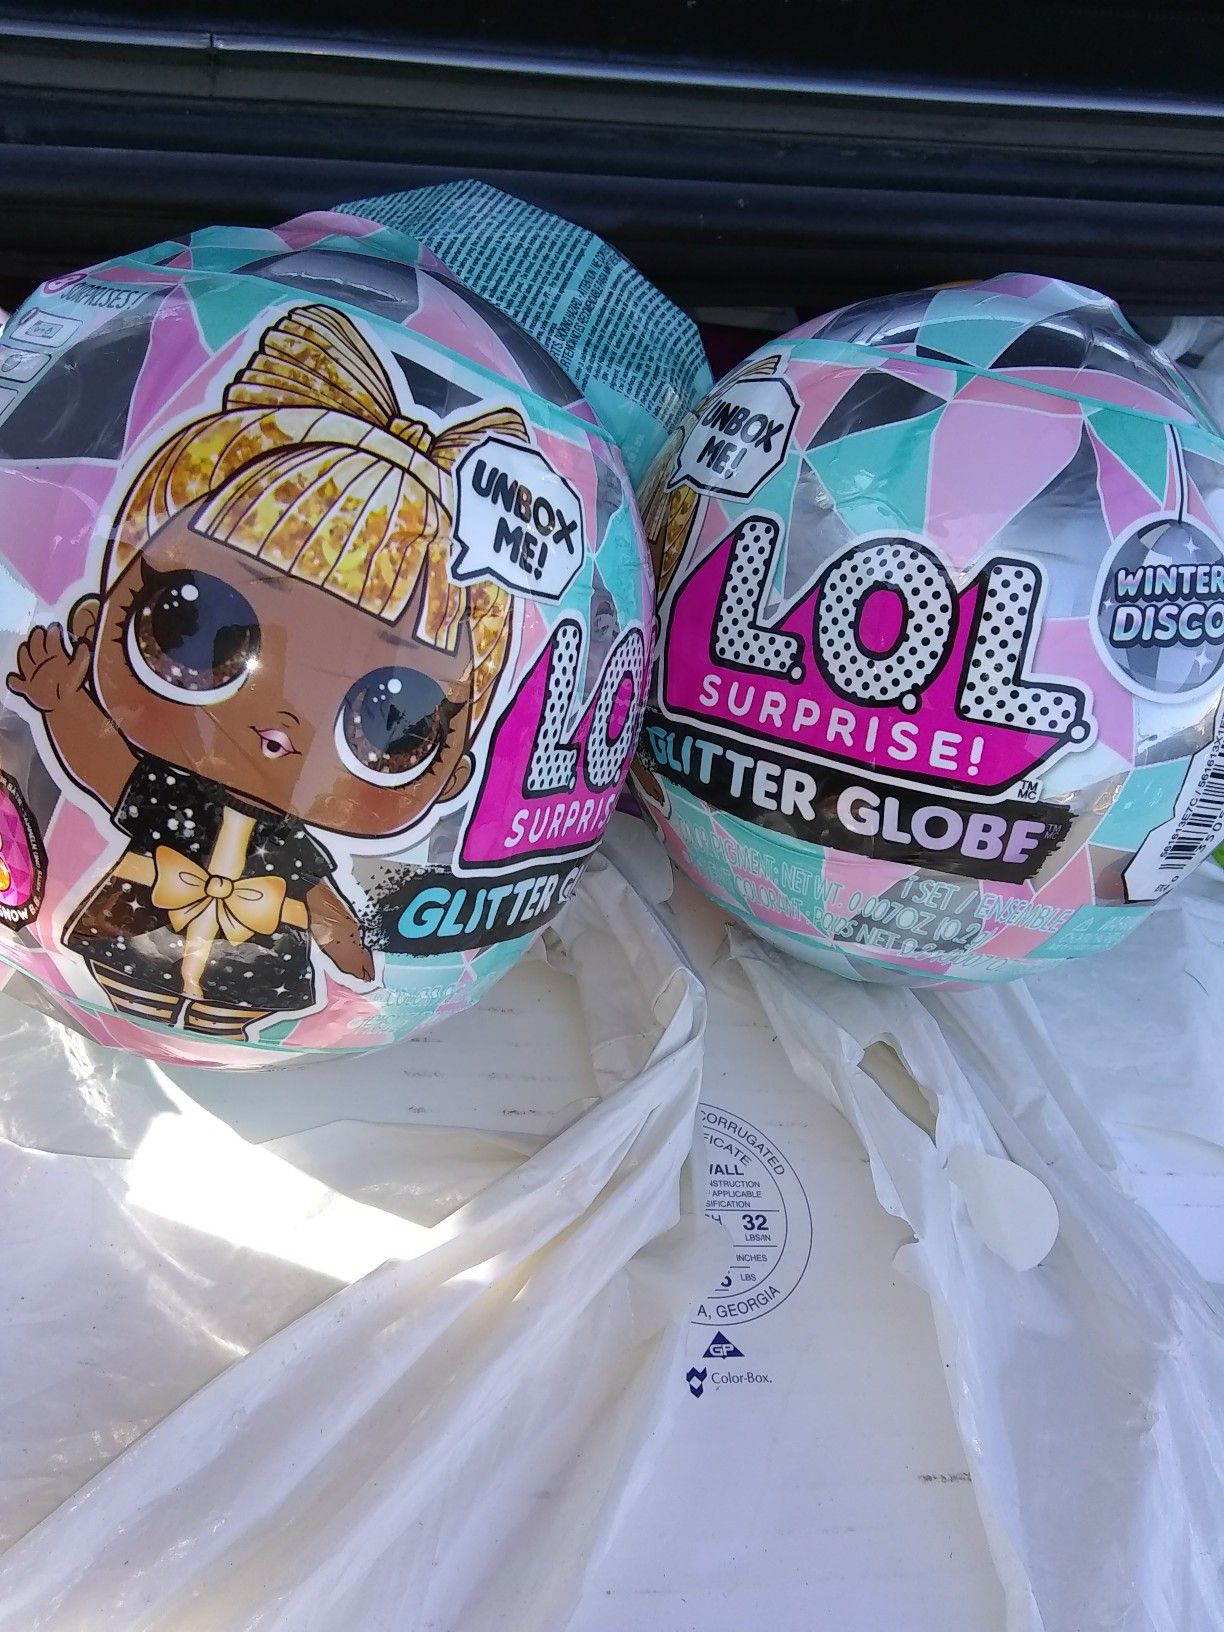 5× L.O.L. SURPRISE! GLITTER GLOBE DOLL WITH GLITTER HAIR + 2× LOL SURPRISE! FLUFFY PETS BOTH ARE WINTER DISCO SERIES